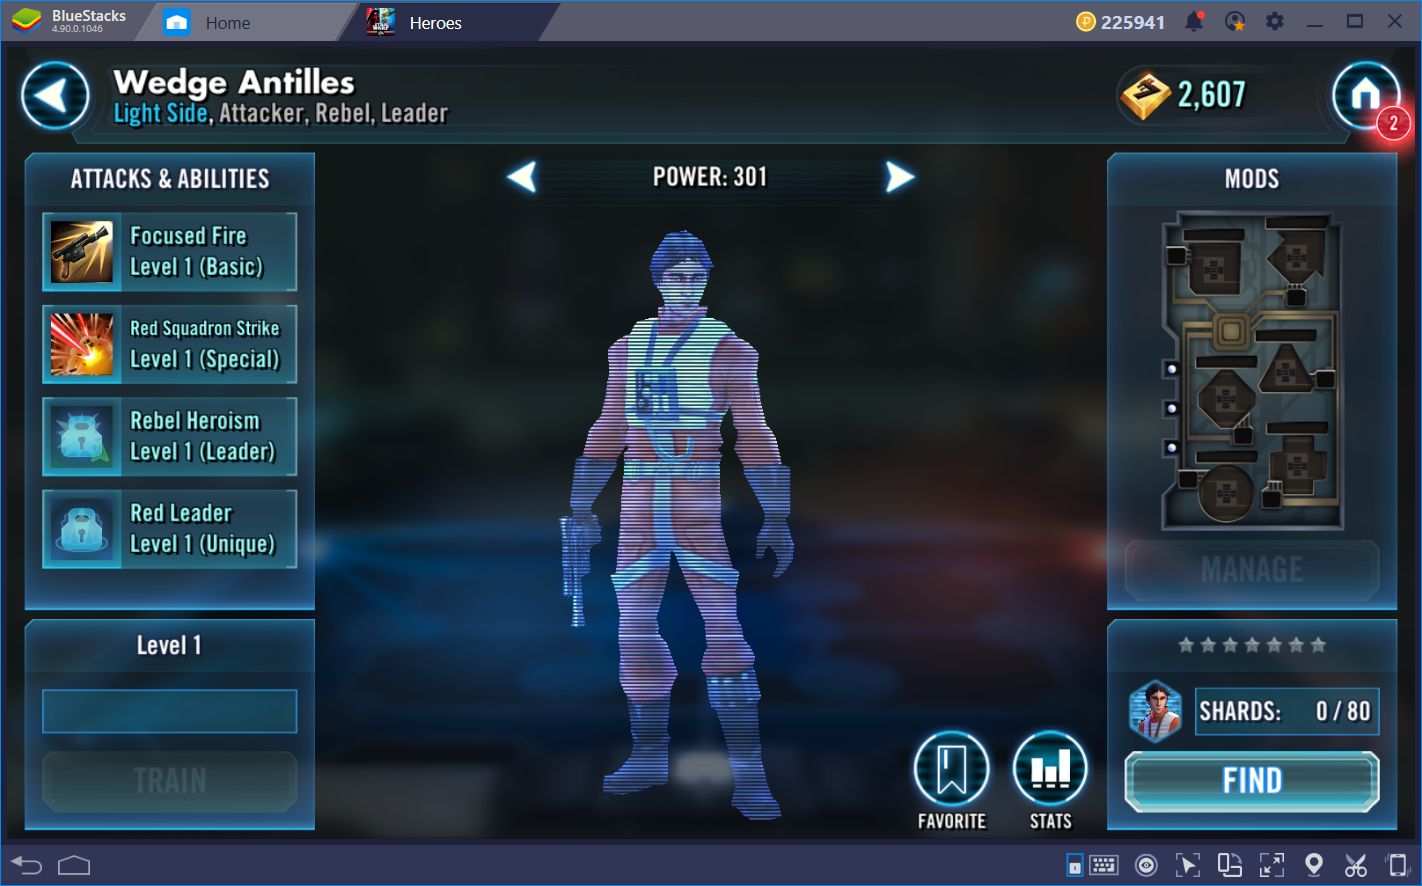 How to Unlock Awesome Characters in Star Wars: Galaxy of Heroes